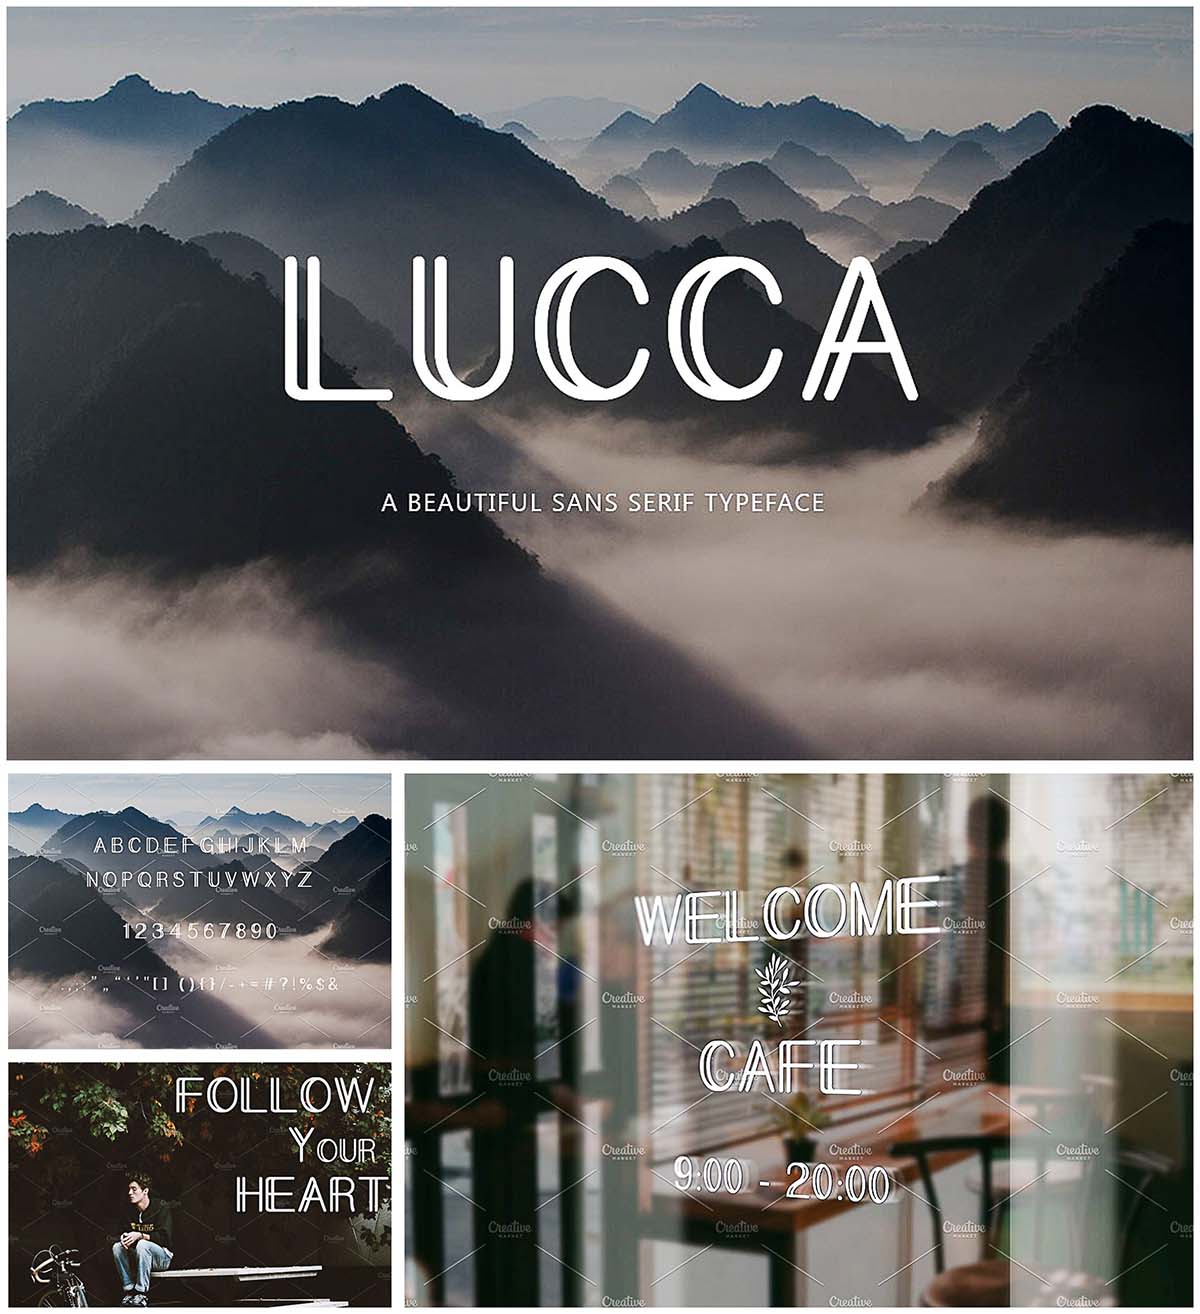 Lucca font with cyrillic typeface